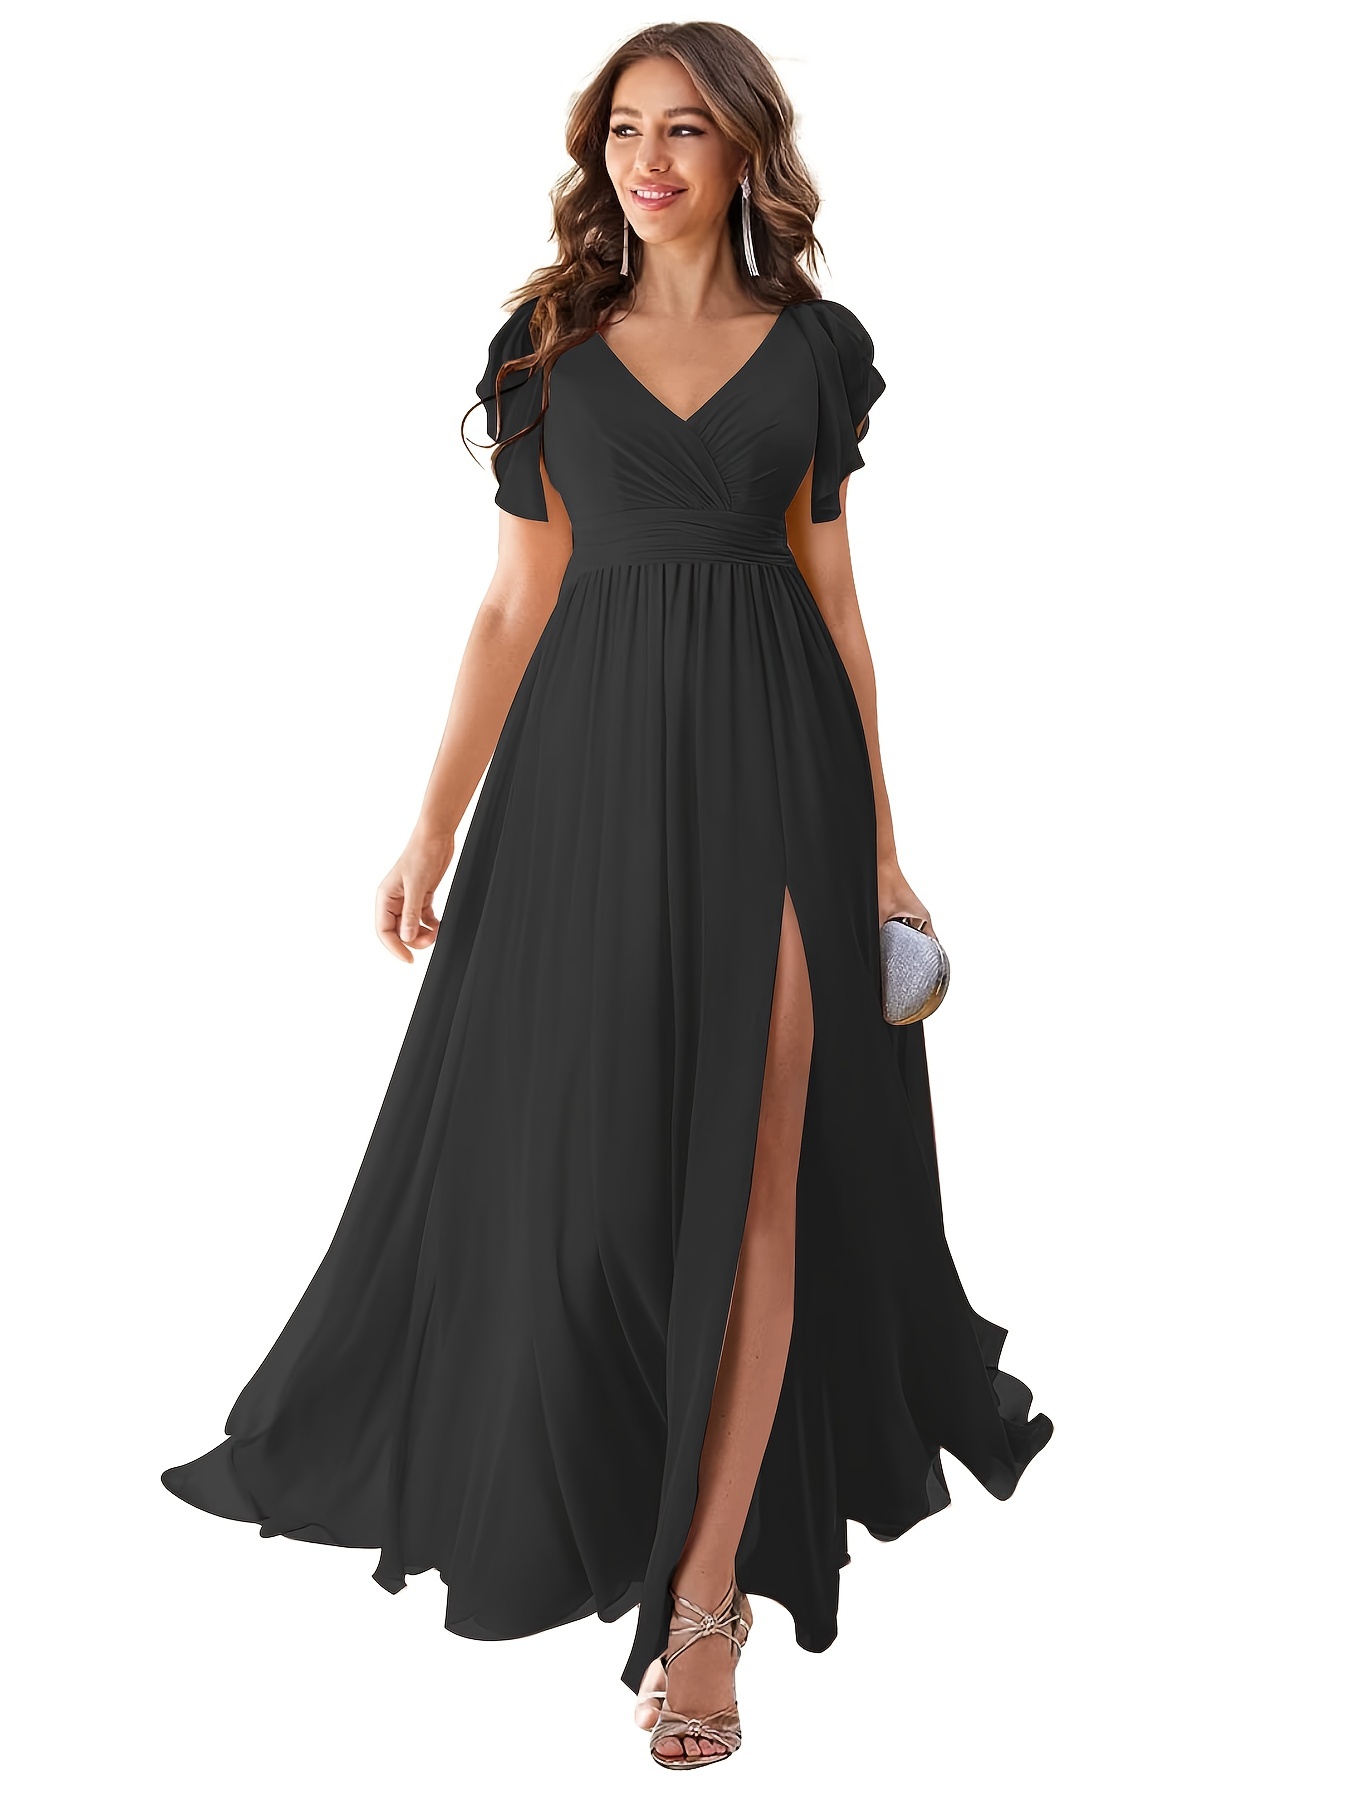 Chiffon Dress Styles For Different Occasions